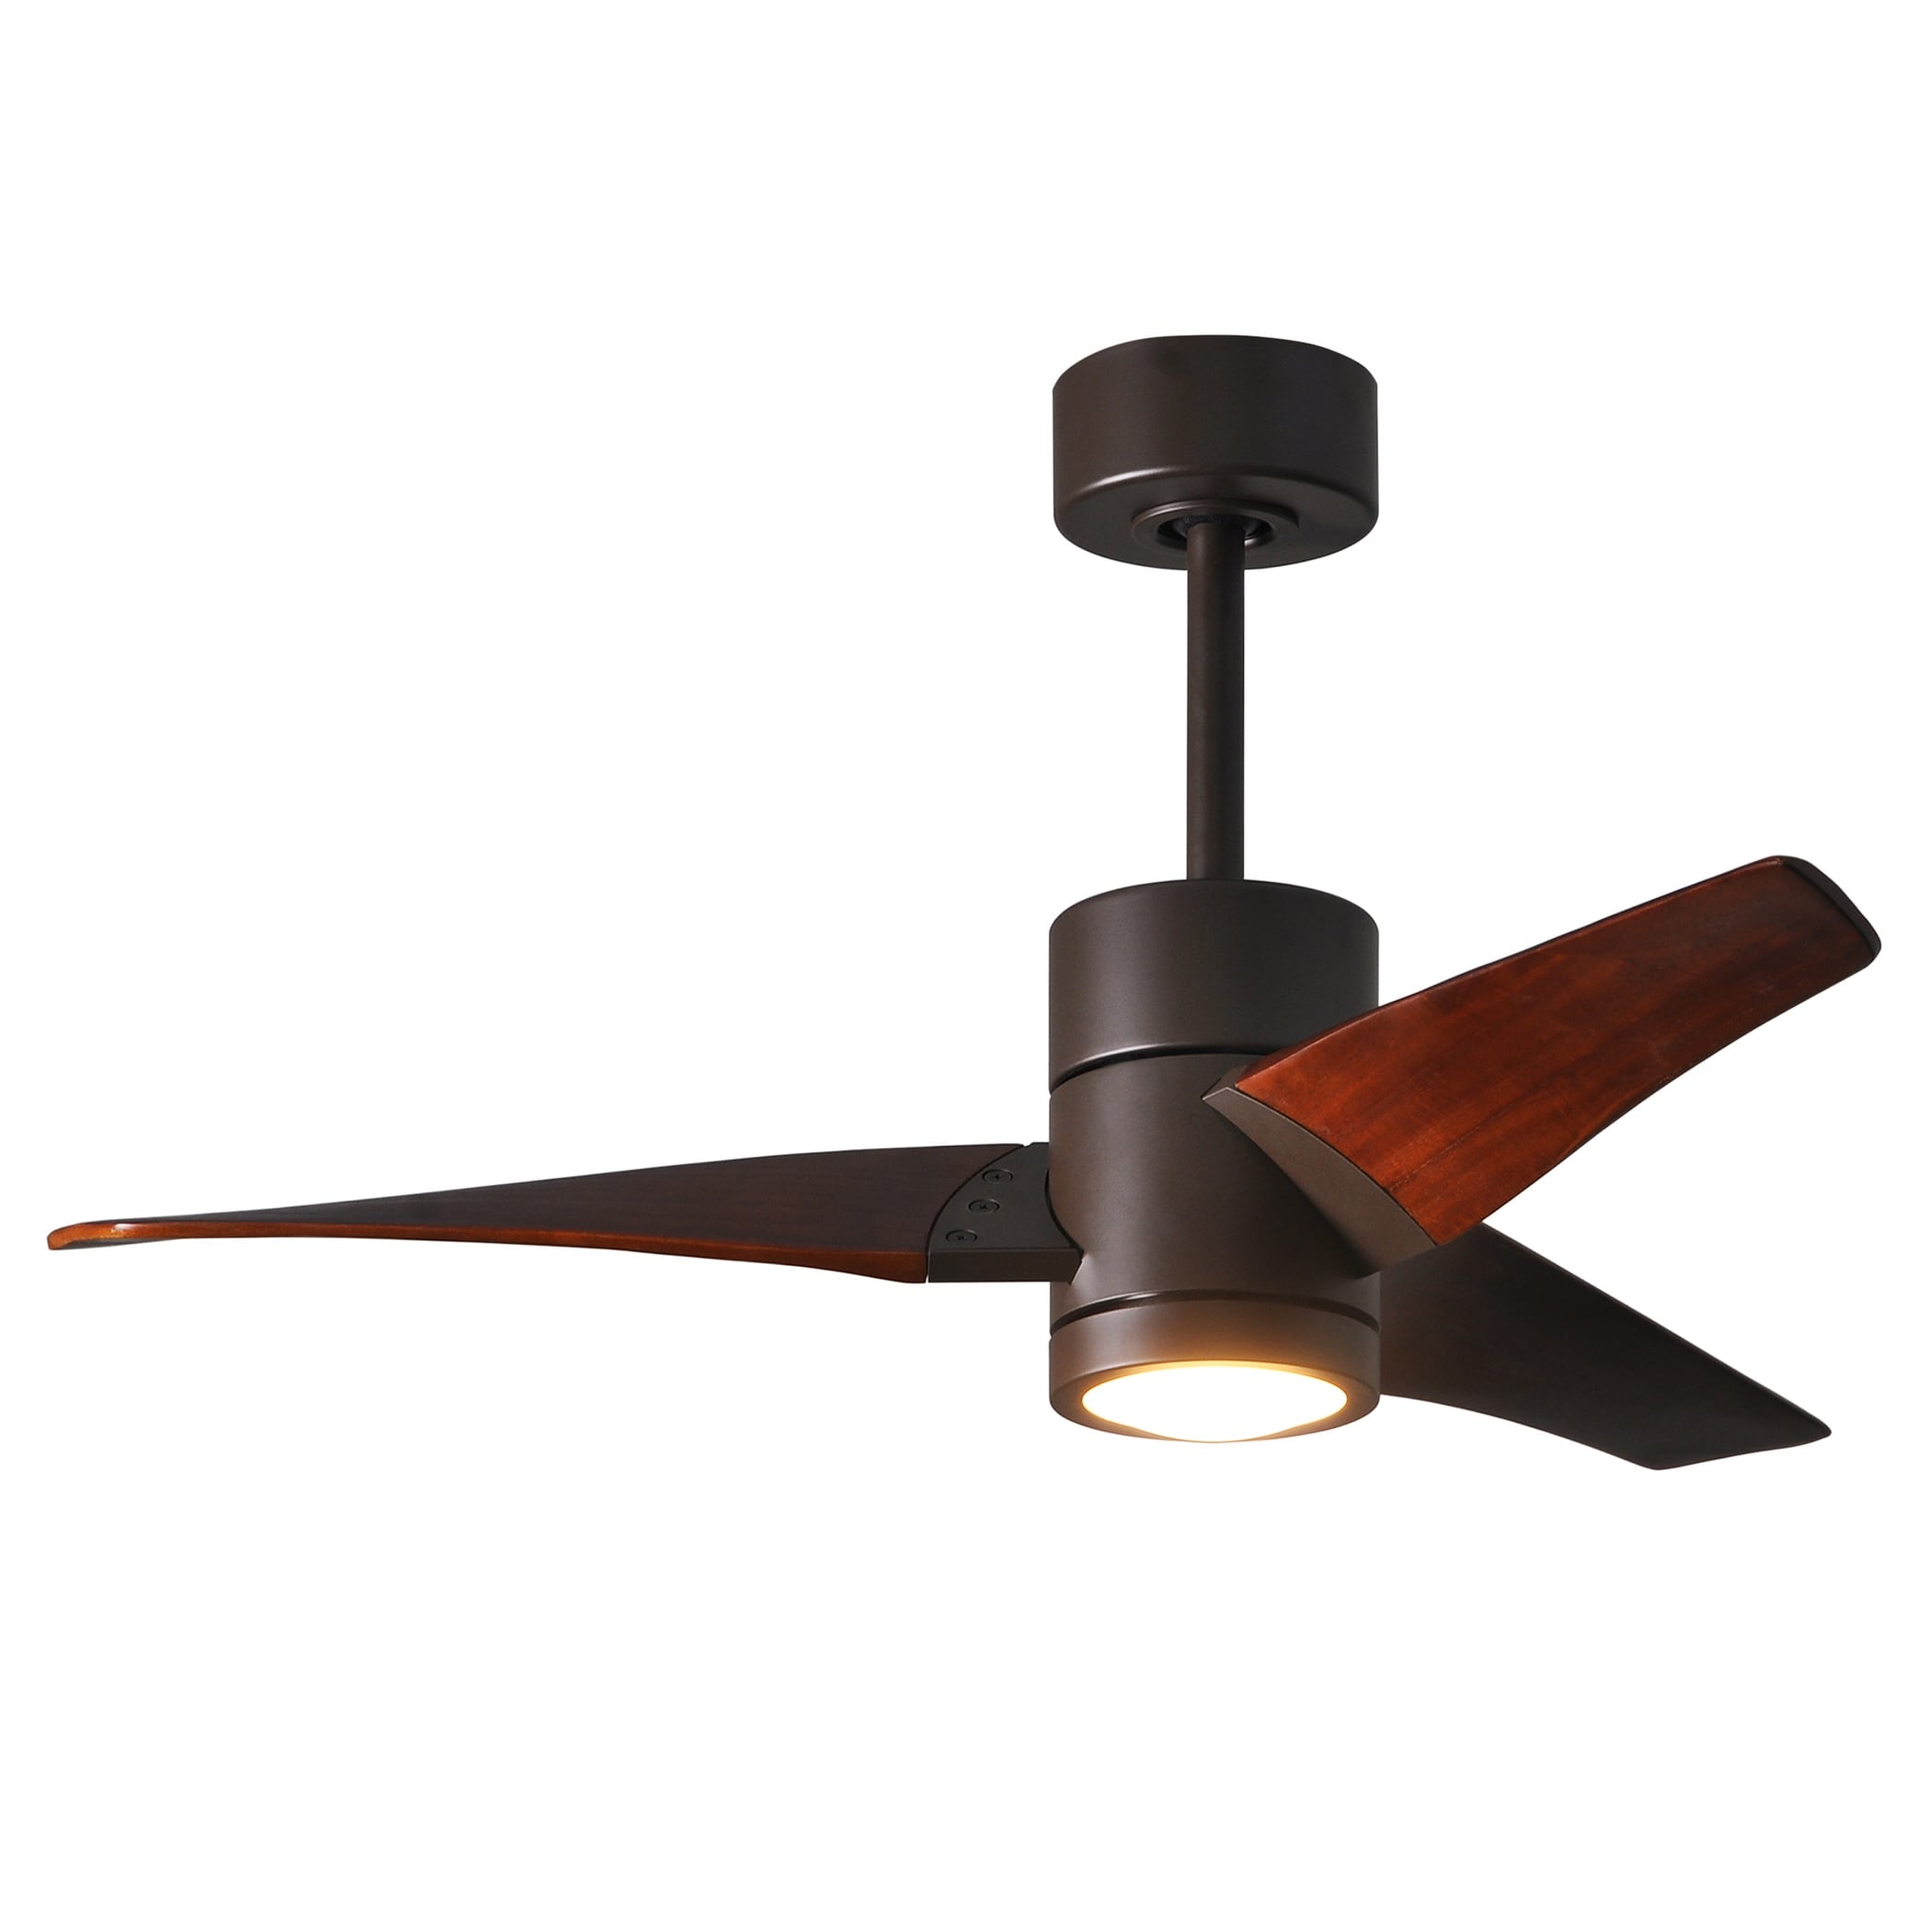 Super Janet 3-blade 42-inch Textured Bronze Paddle Fan with Frosted Glass Light Kit - Walnut Tone Blades